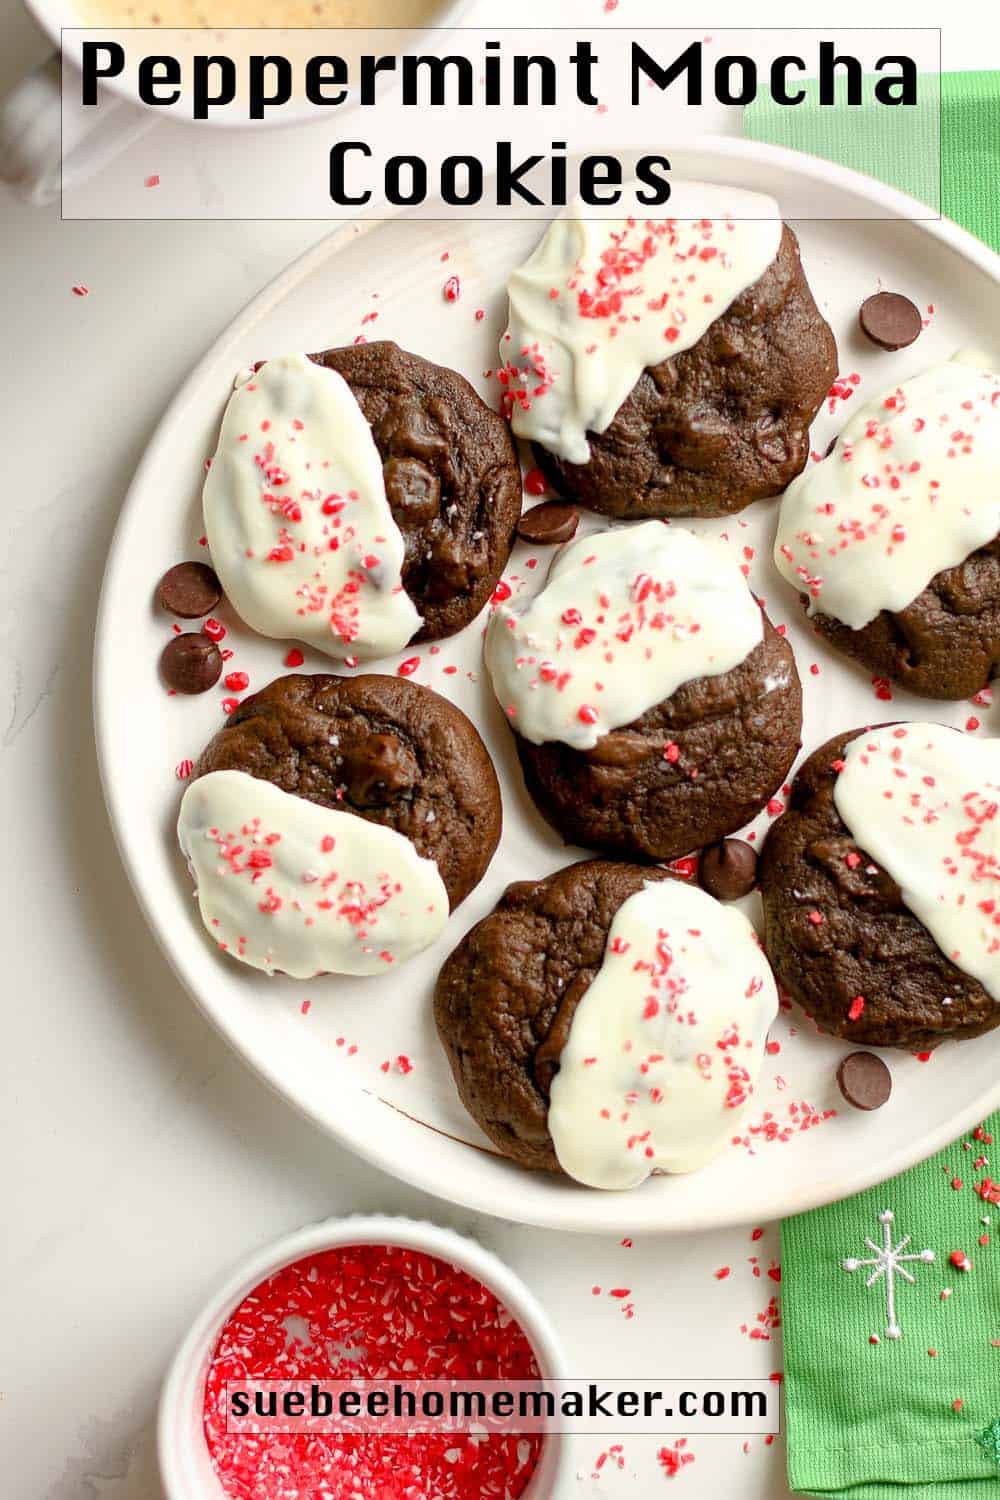 A plate of peppermint mocha cookies.